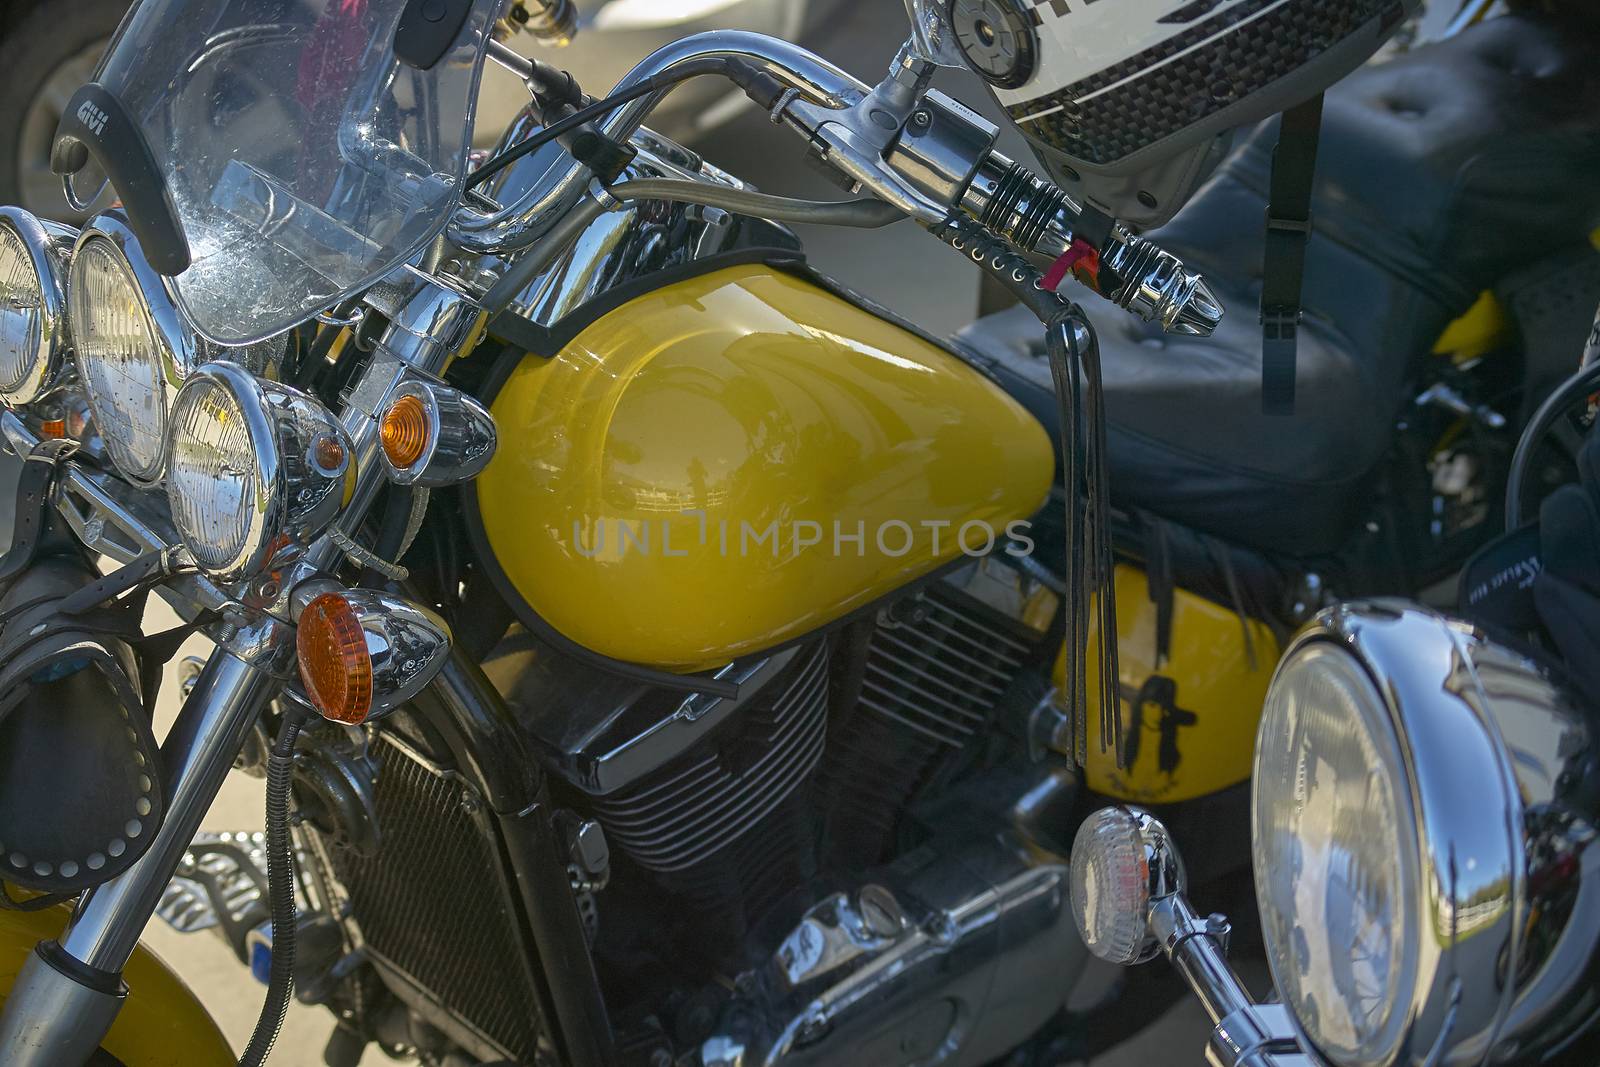 detail of the tank and engine of a yellow custom bike, motorcycle inserted in a rally with other bikes, of which sprouts some details.